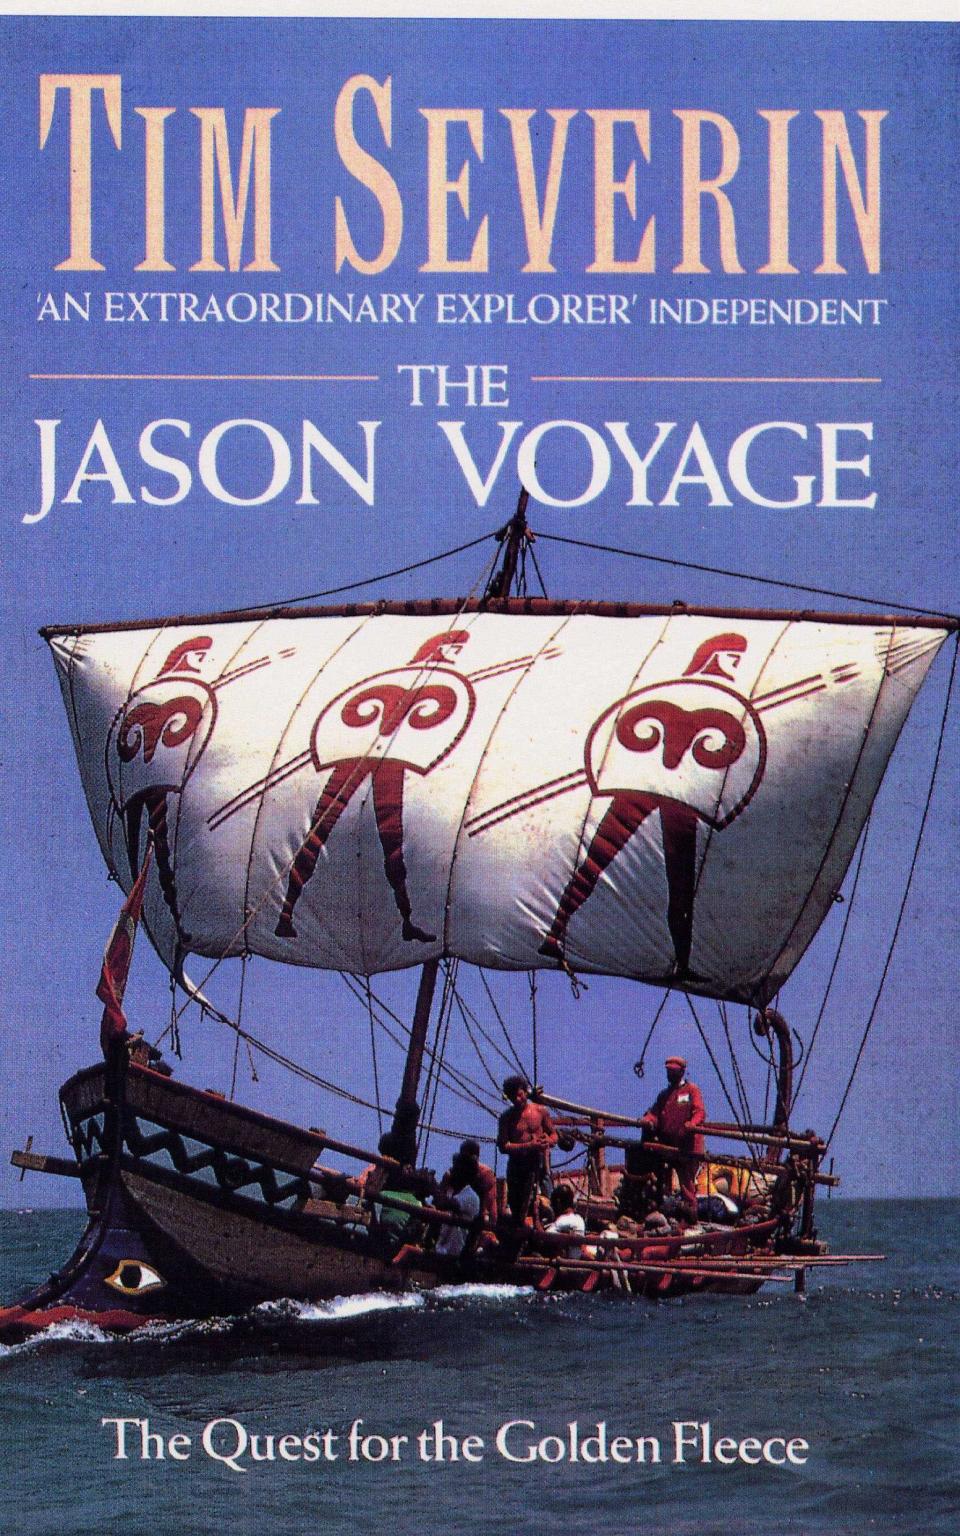 Tim Severin's account of his travels in a replica of a Bronze Age galley to trace the Mediterranean journeys of Jason